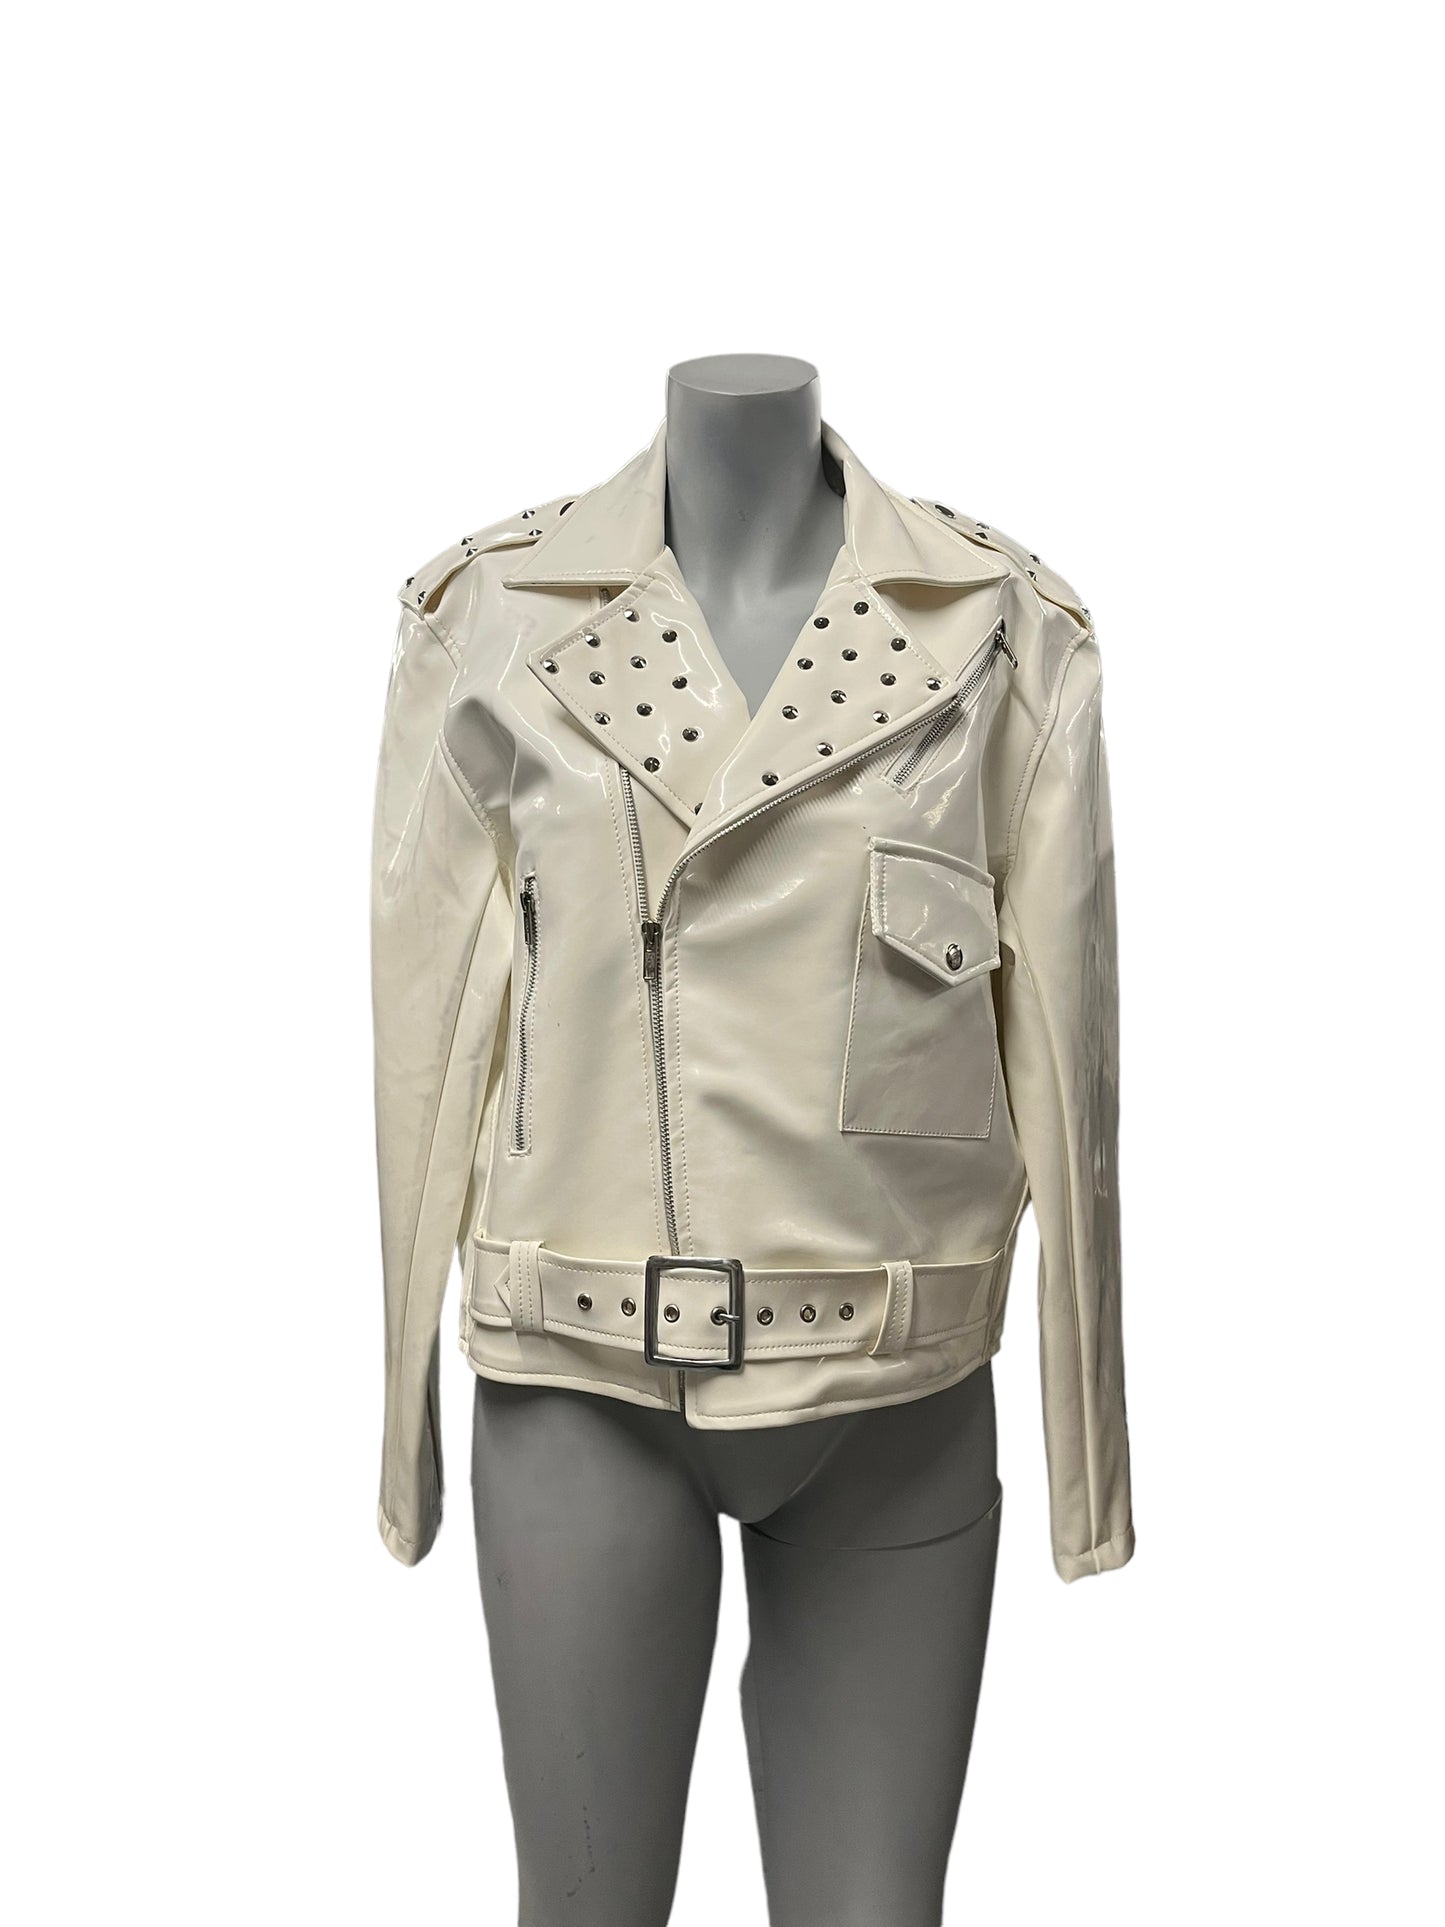 Fashion World - LL122 - White Jacket with Studs and Erotic Stains - Size M